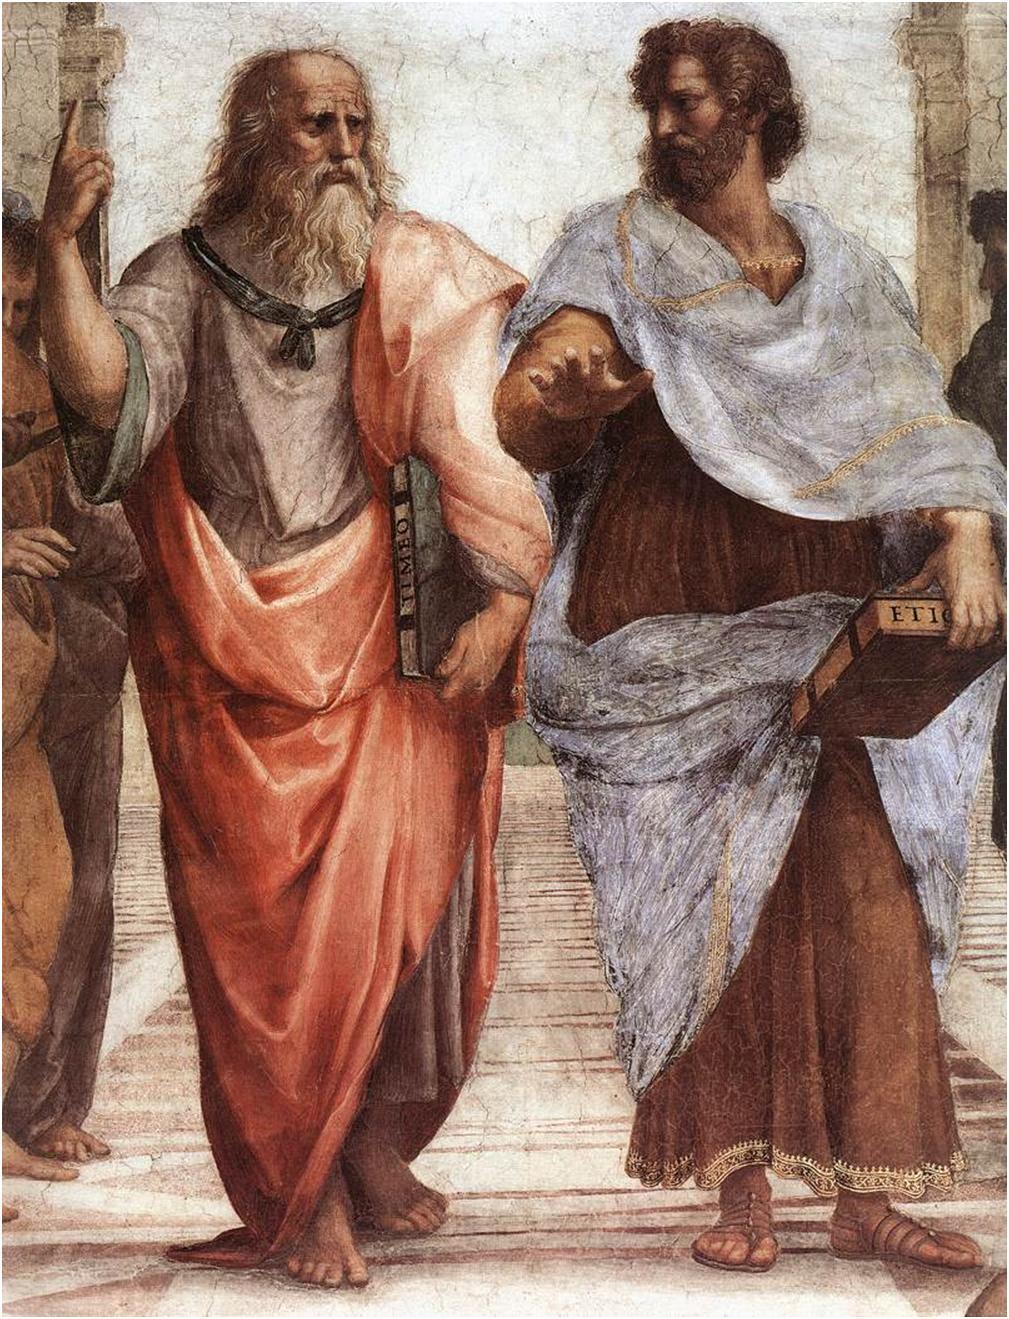 In this painting by Raphael, Plato (holding the Timeus) pointing up, representing the importance of focusing on the eternal Eidos, while Aristotle